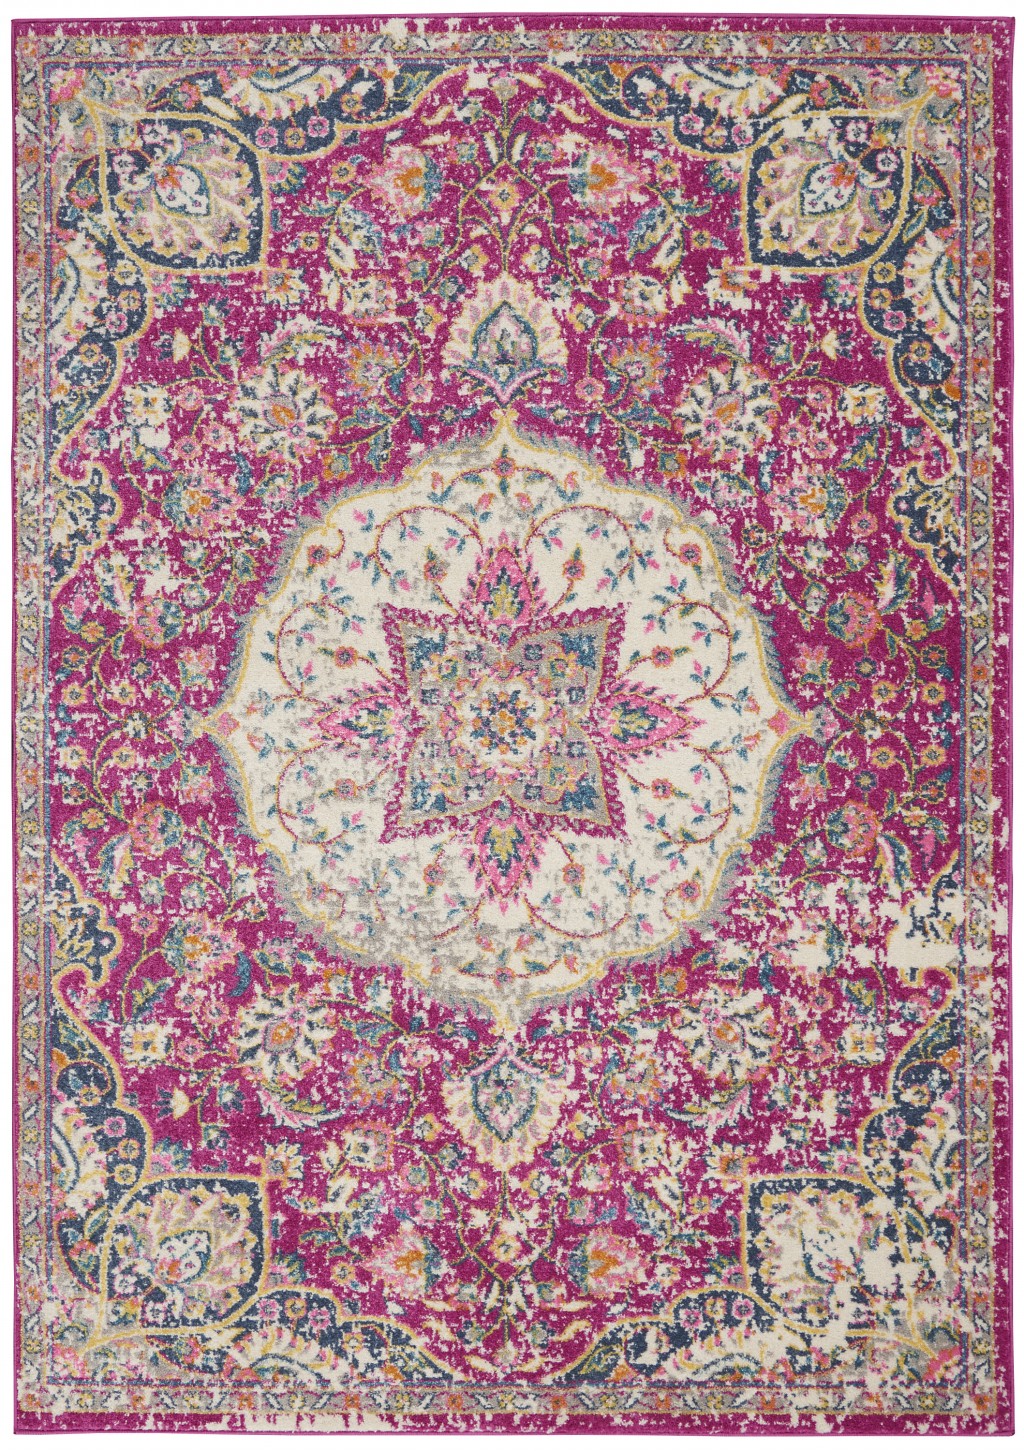 4' X 6' Pink Dhurrie Area Rug-385539-1